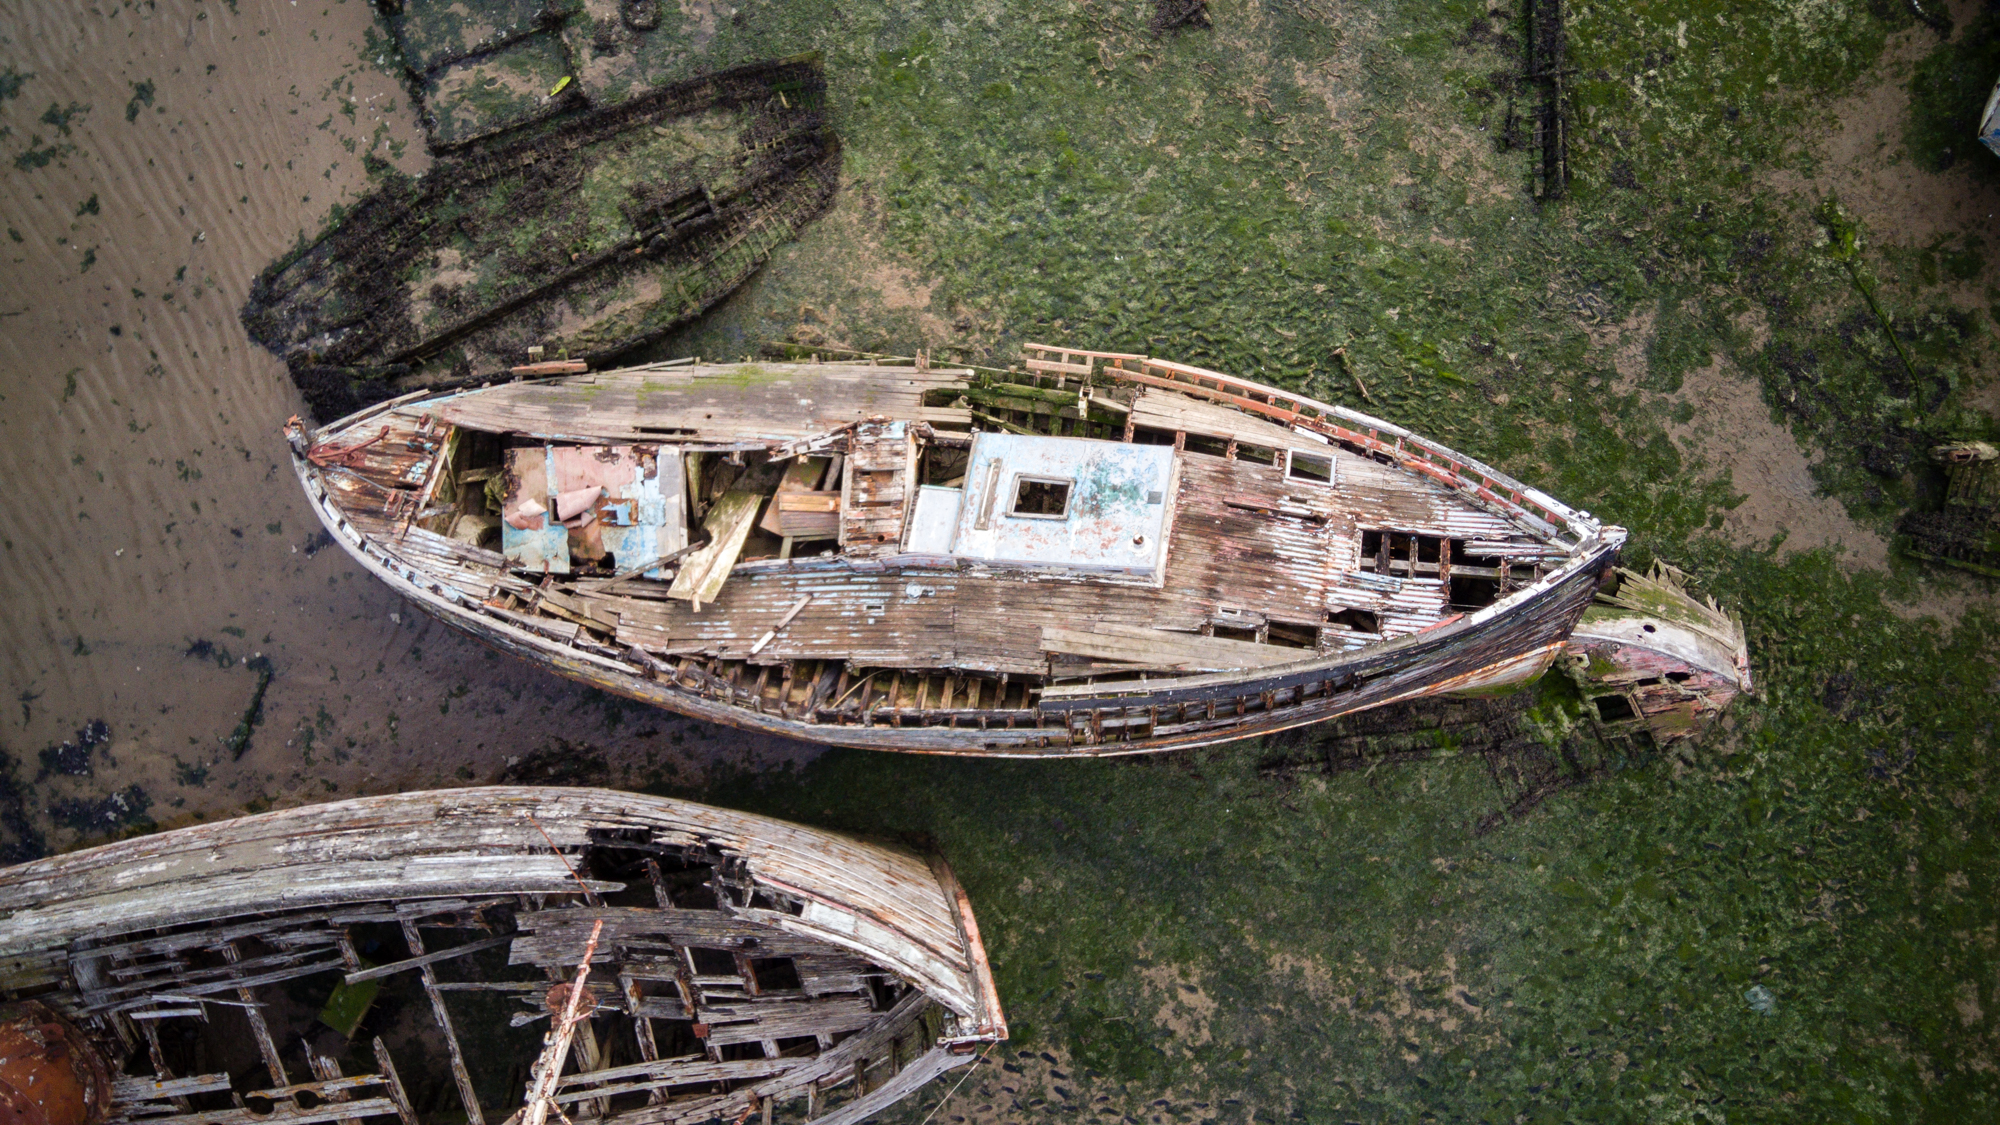 Photo of derelict boats taken with the Potensic Atom drone